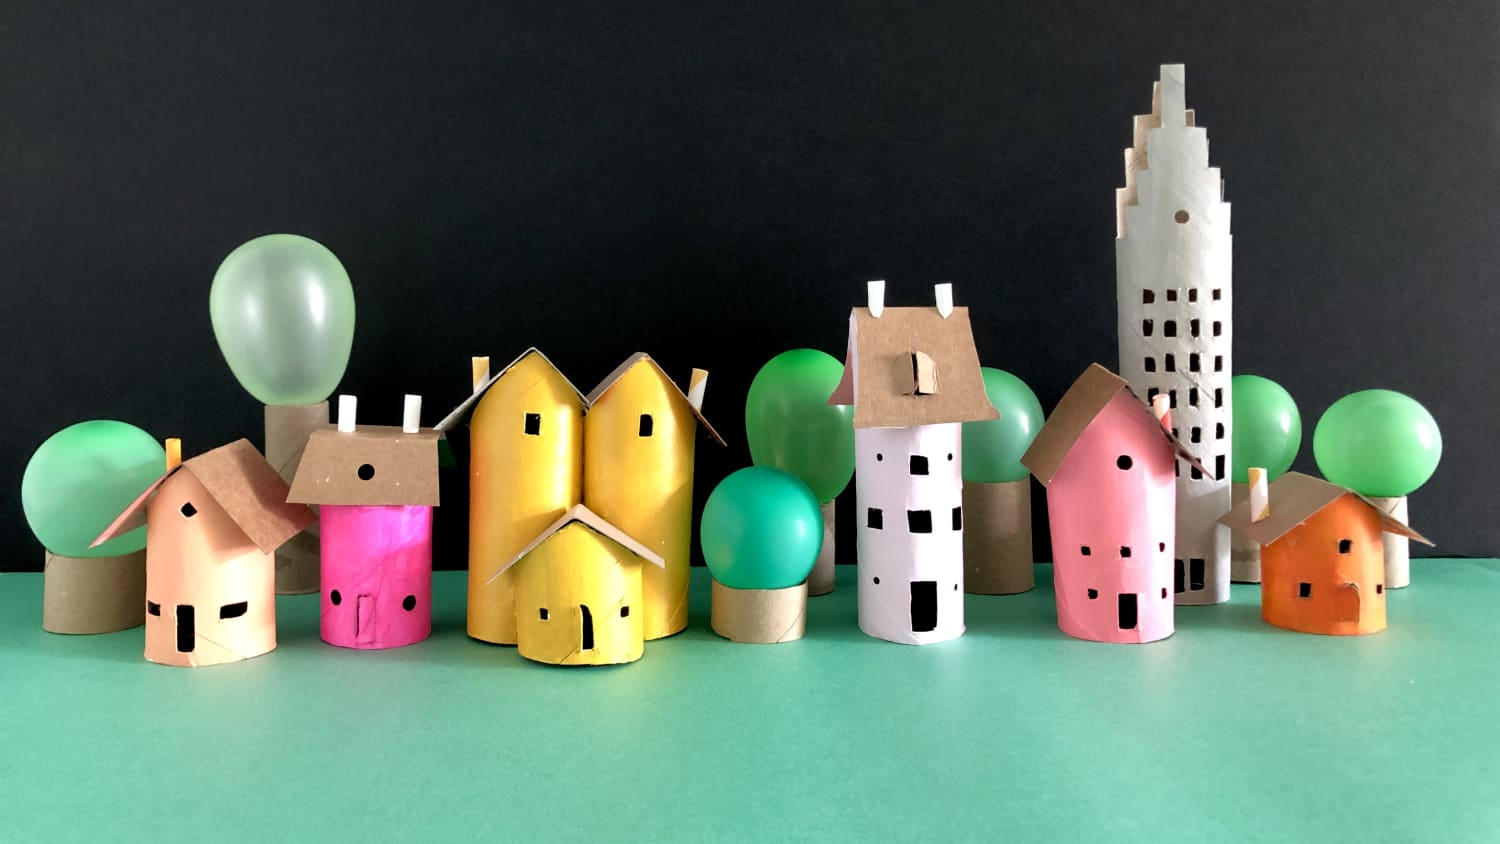 5 Easy Paper Roll Crafts Cute Animals Toys for Kids To Do At Home 